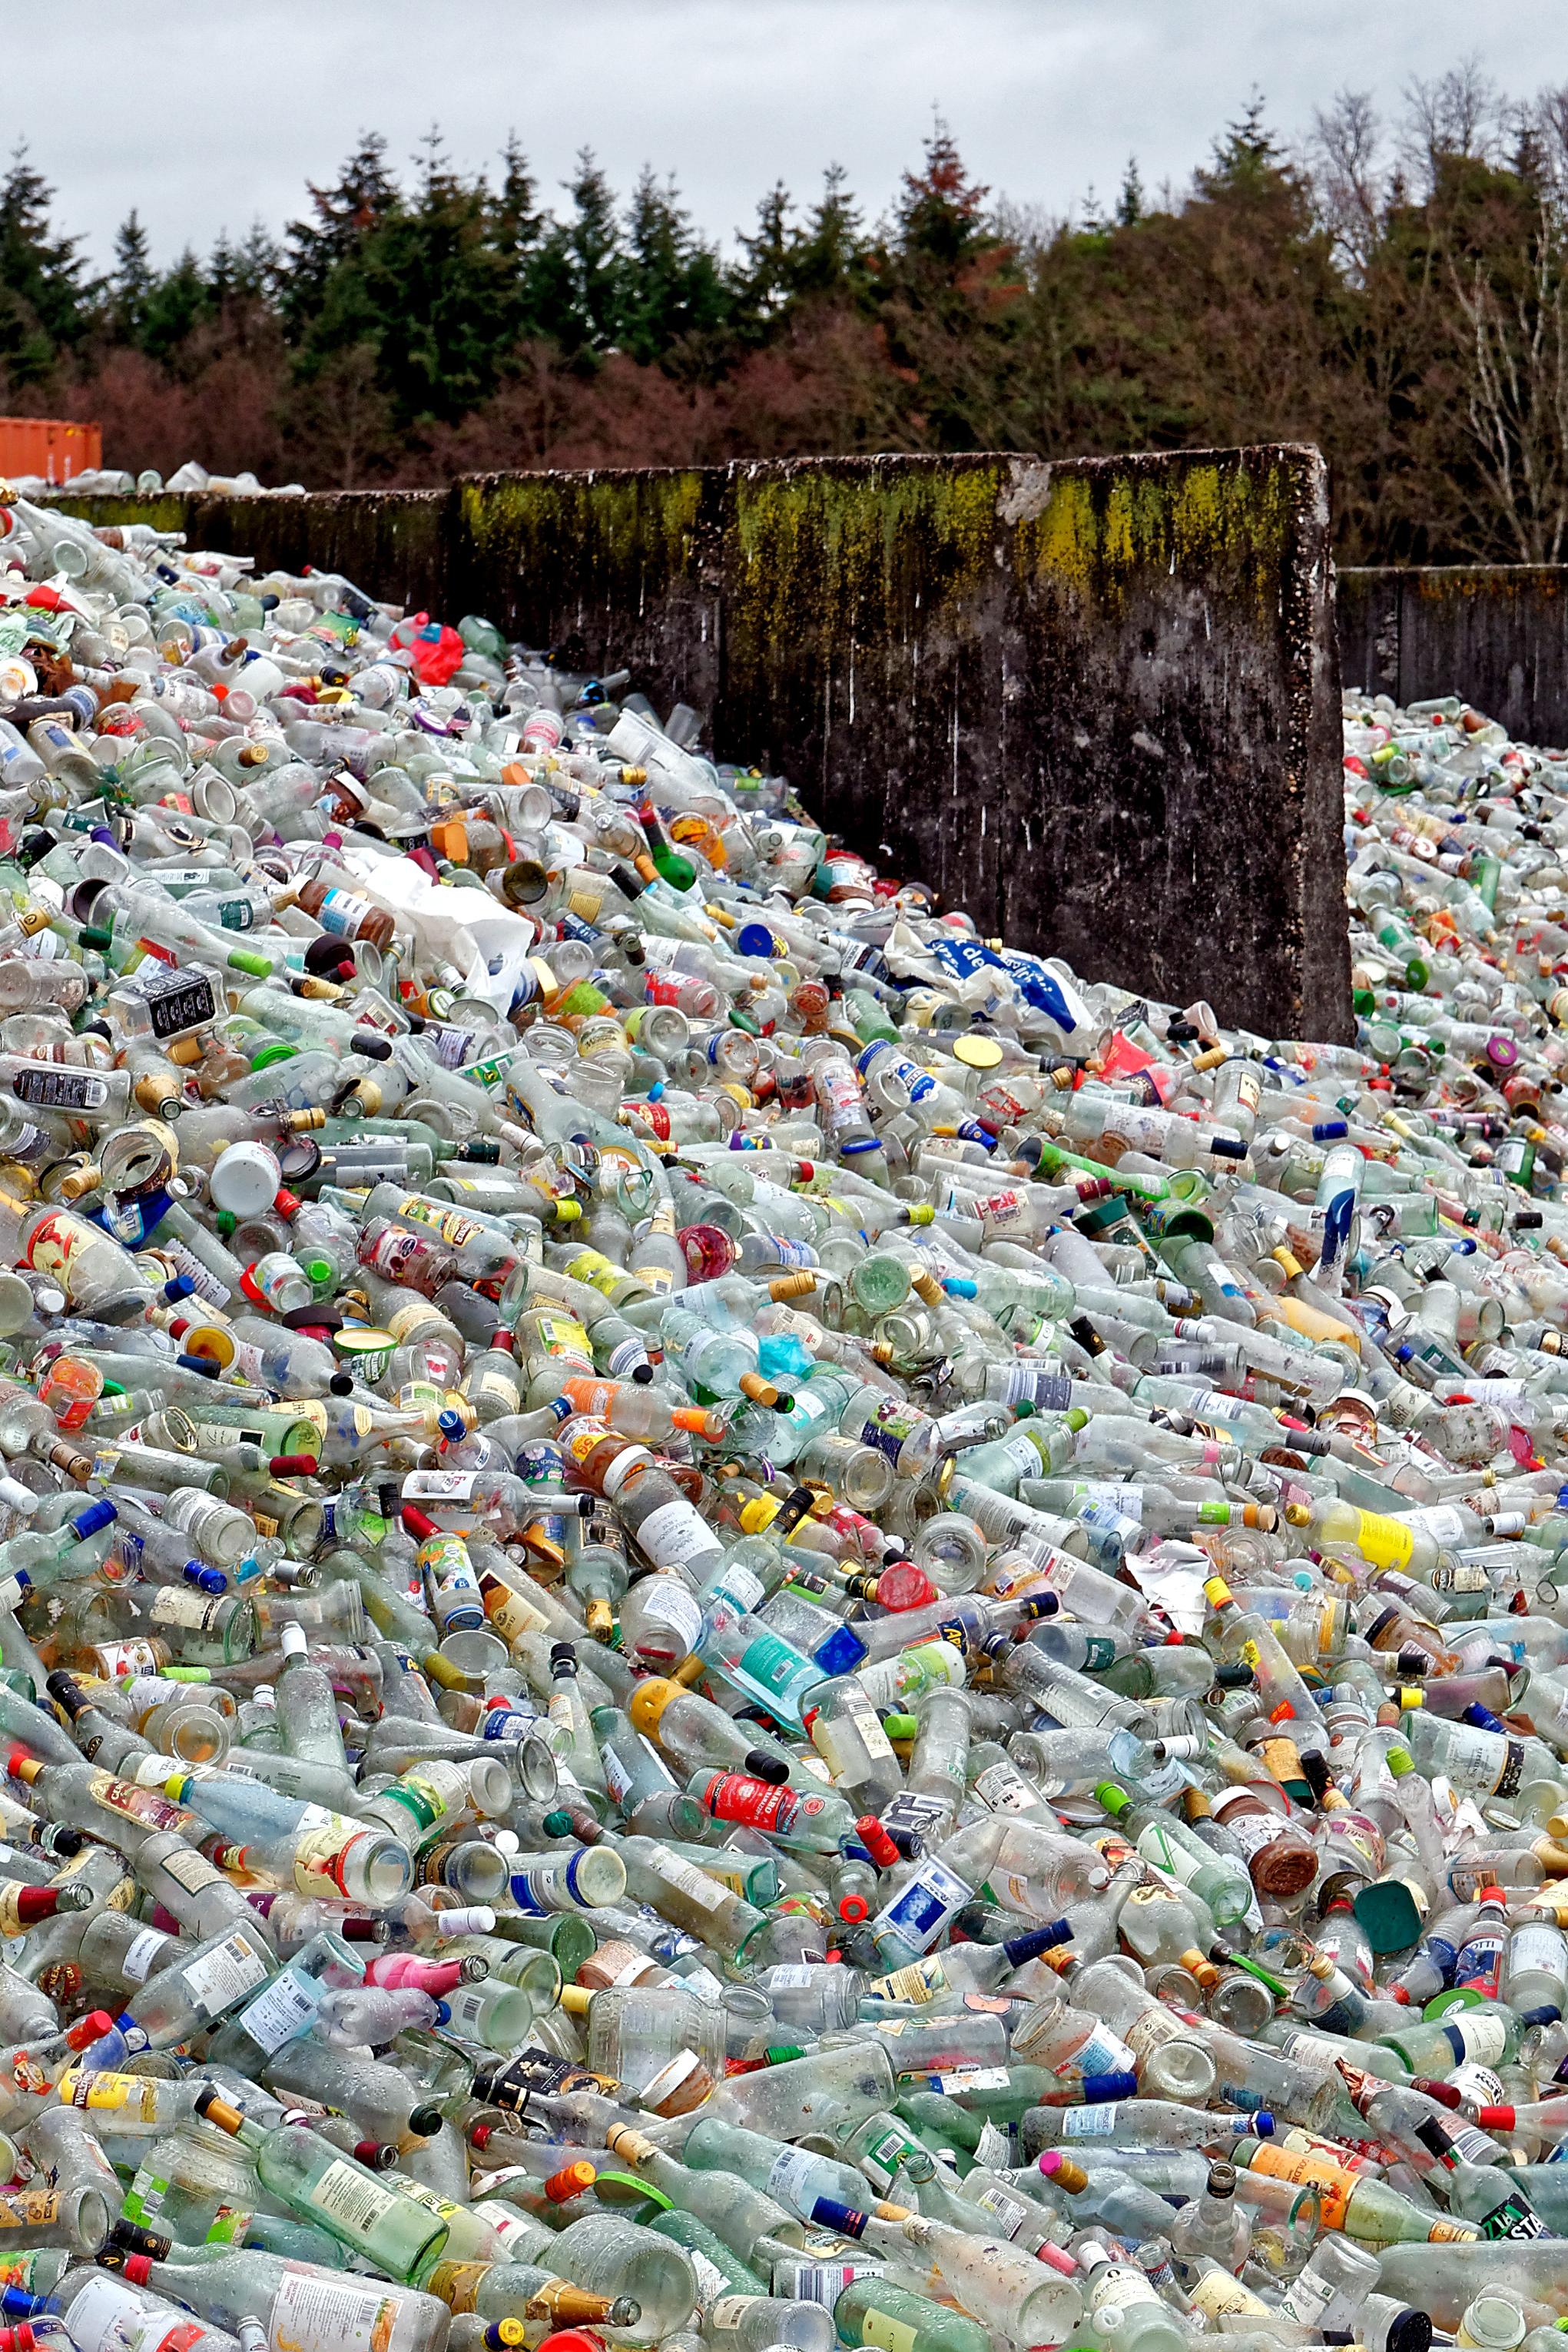 Waste exports are exploited by criminal gangs and should be banned, says environment chief